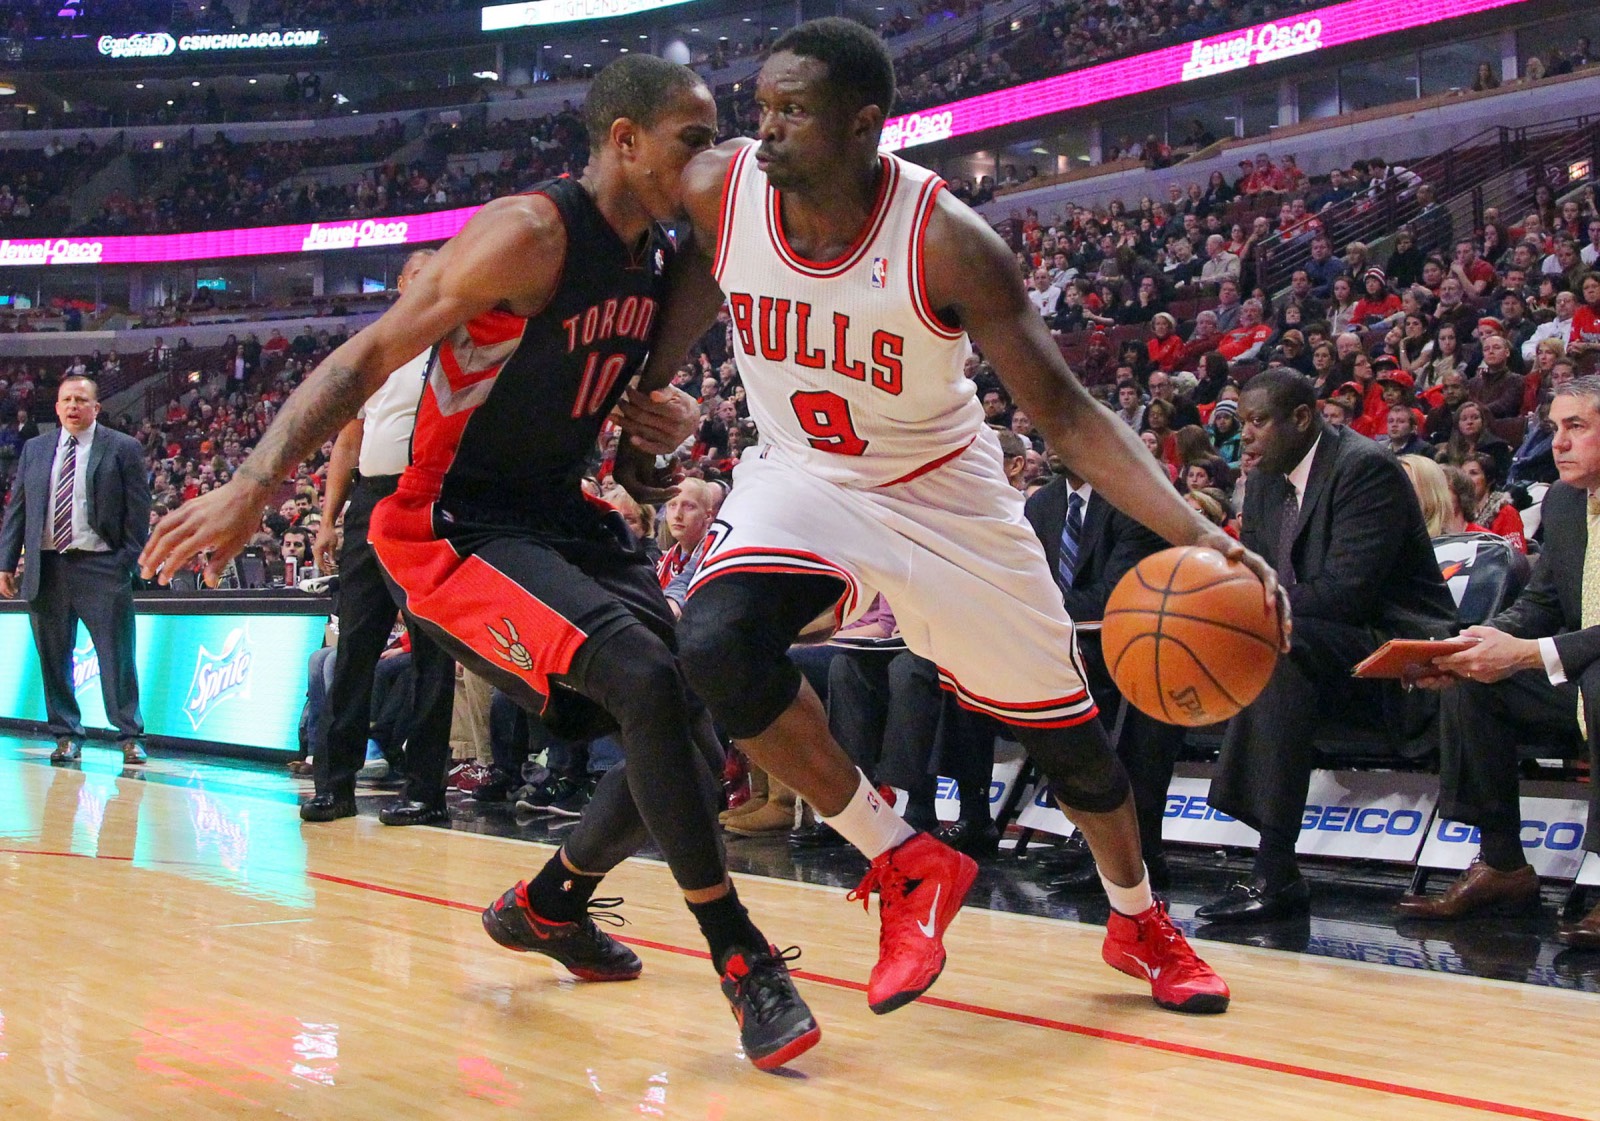 Chicago Bulls small forward Luol Deng (9) is defended by Toronto Raptors shooting guard DeMar DeRozan (10) during the first quarter at the United Center. | Dennis Wierzbicki/USA TODAY Sports 